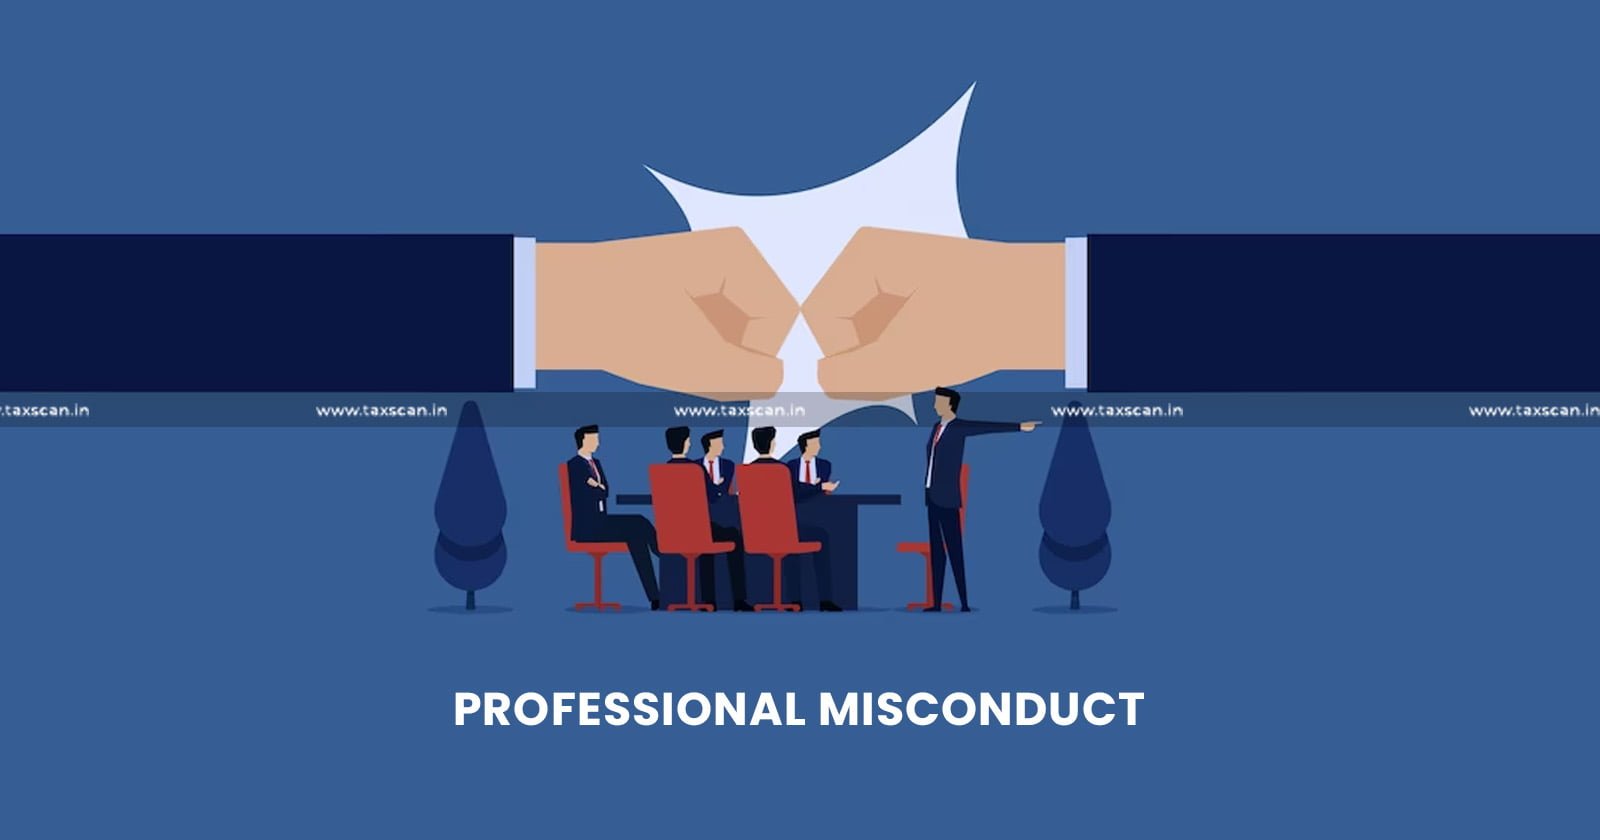 Casual Approach of CA - Casual Approach - CA - Attending Proceedings - Professional Misconduct under CA Act - Professional Misconduct - CA Act - ICAI - taxscan